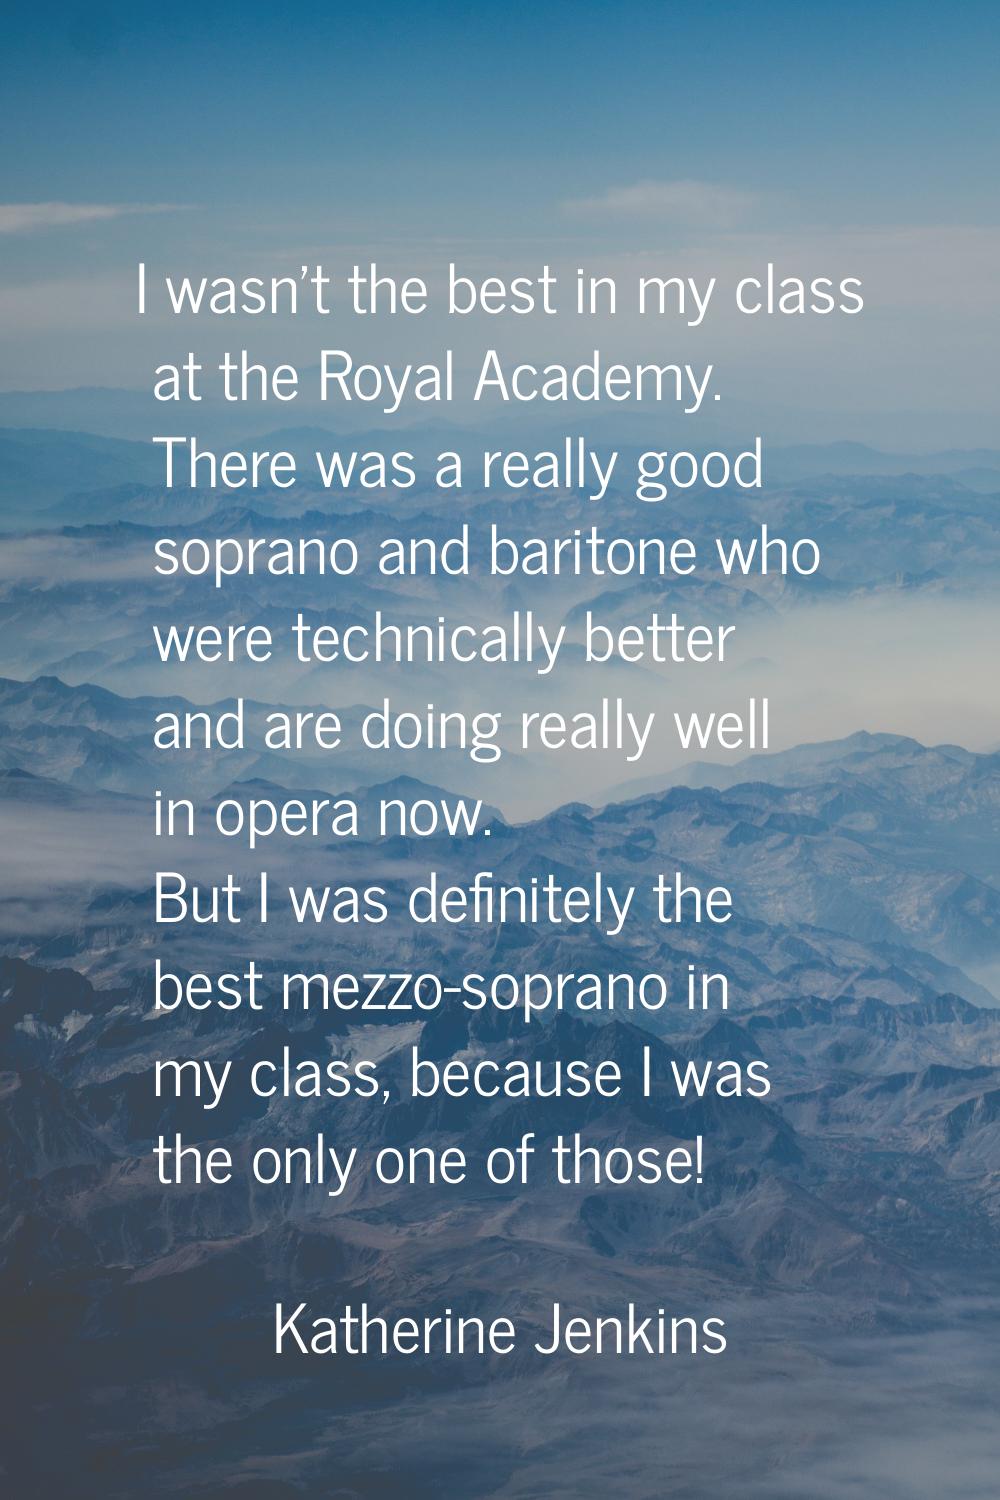 I wasn't the best in my class at the Royal Academy. There was a really good soprano and baritone wh